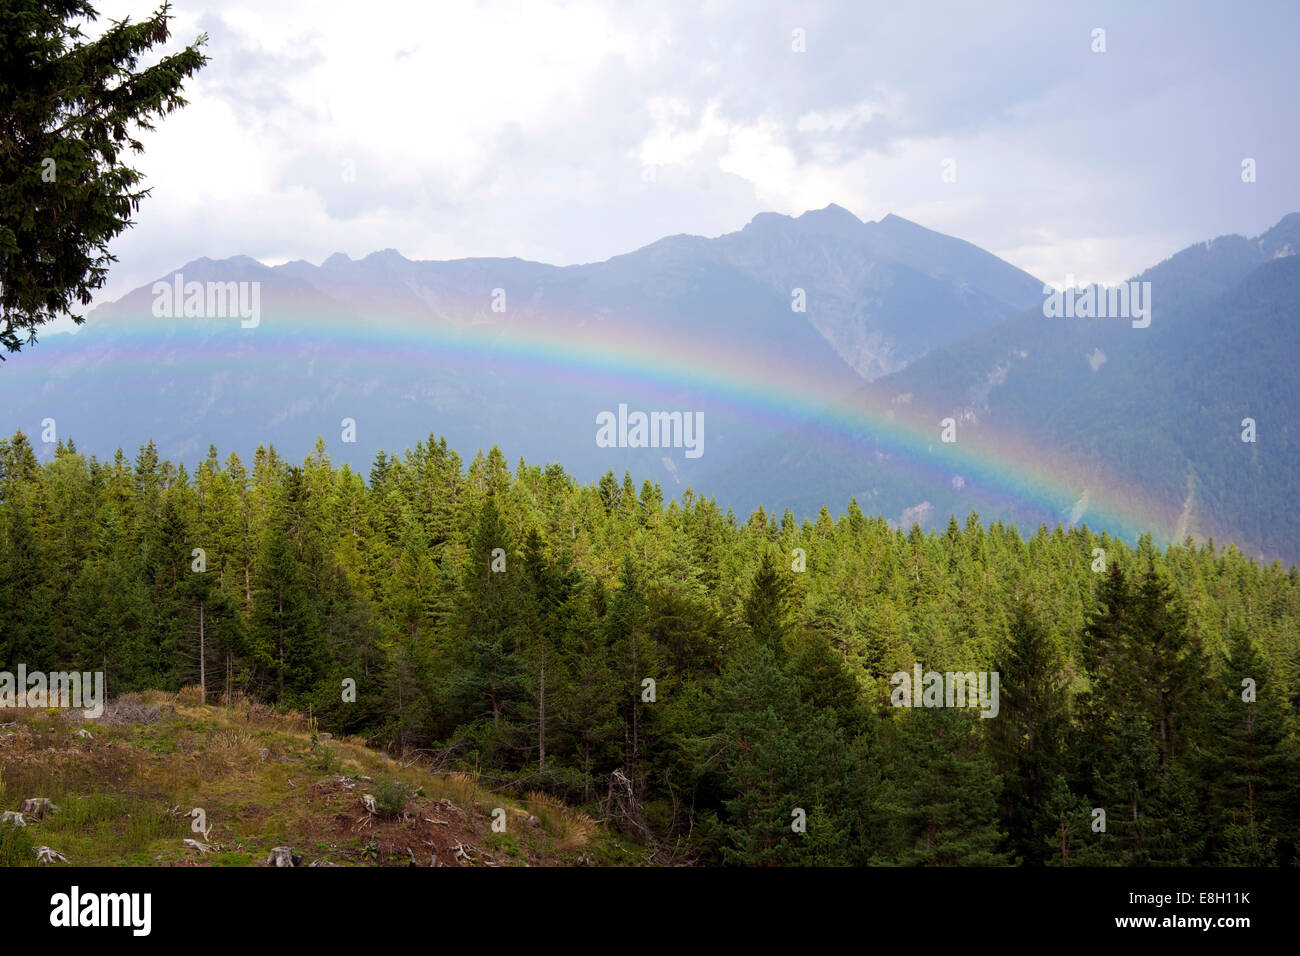 Rainbow seen from above. Photo shot in the Bavarian Alps. Stock Photo